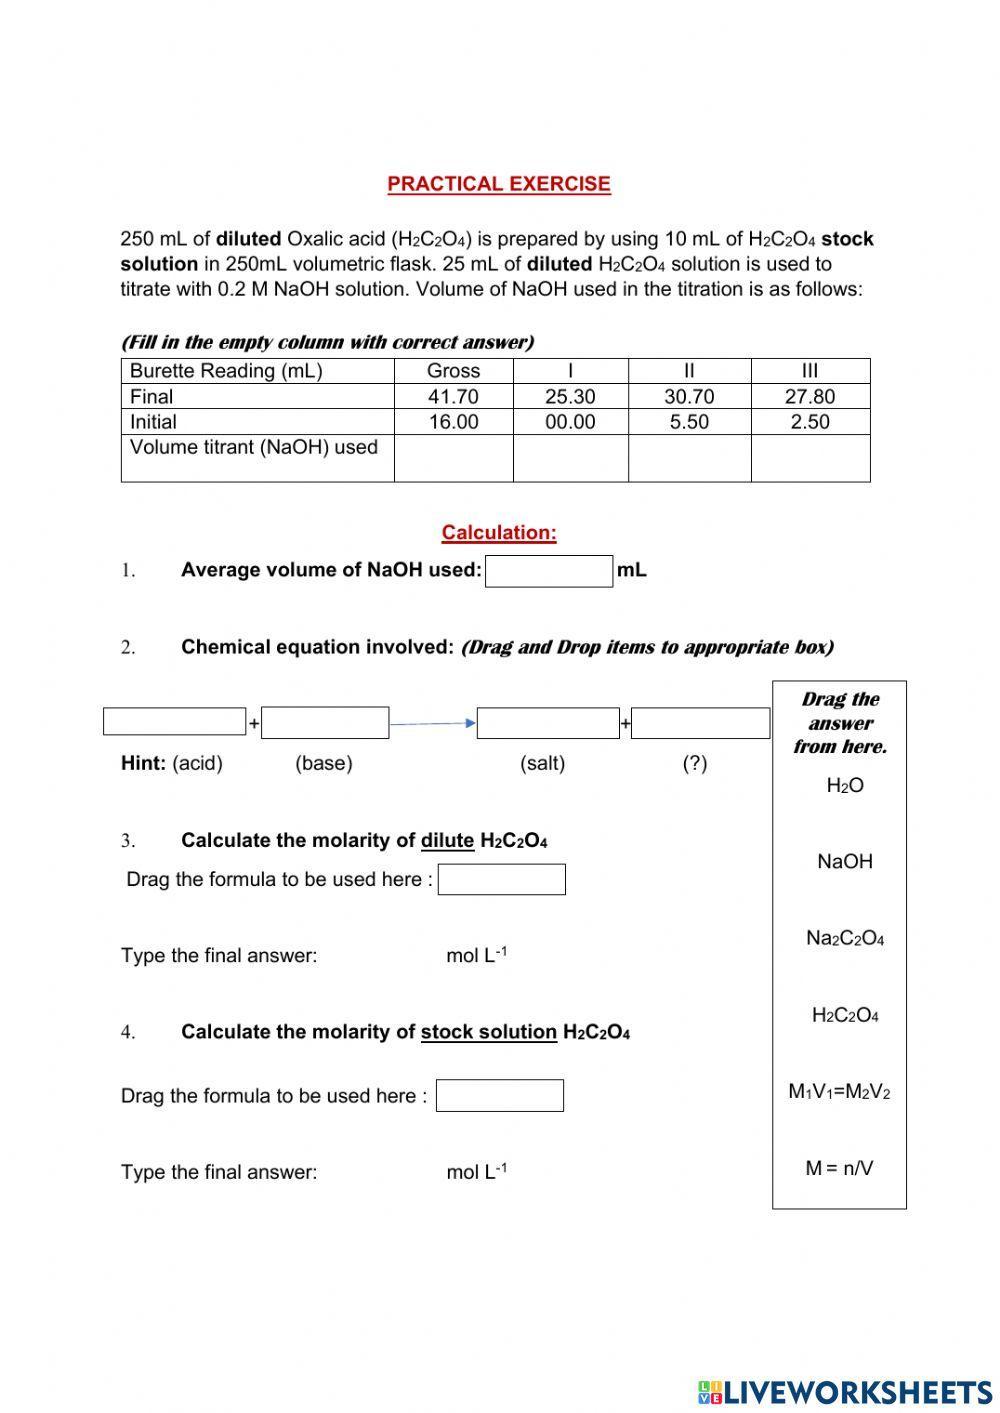 Titration report exercise